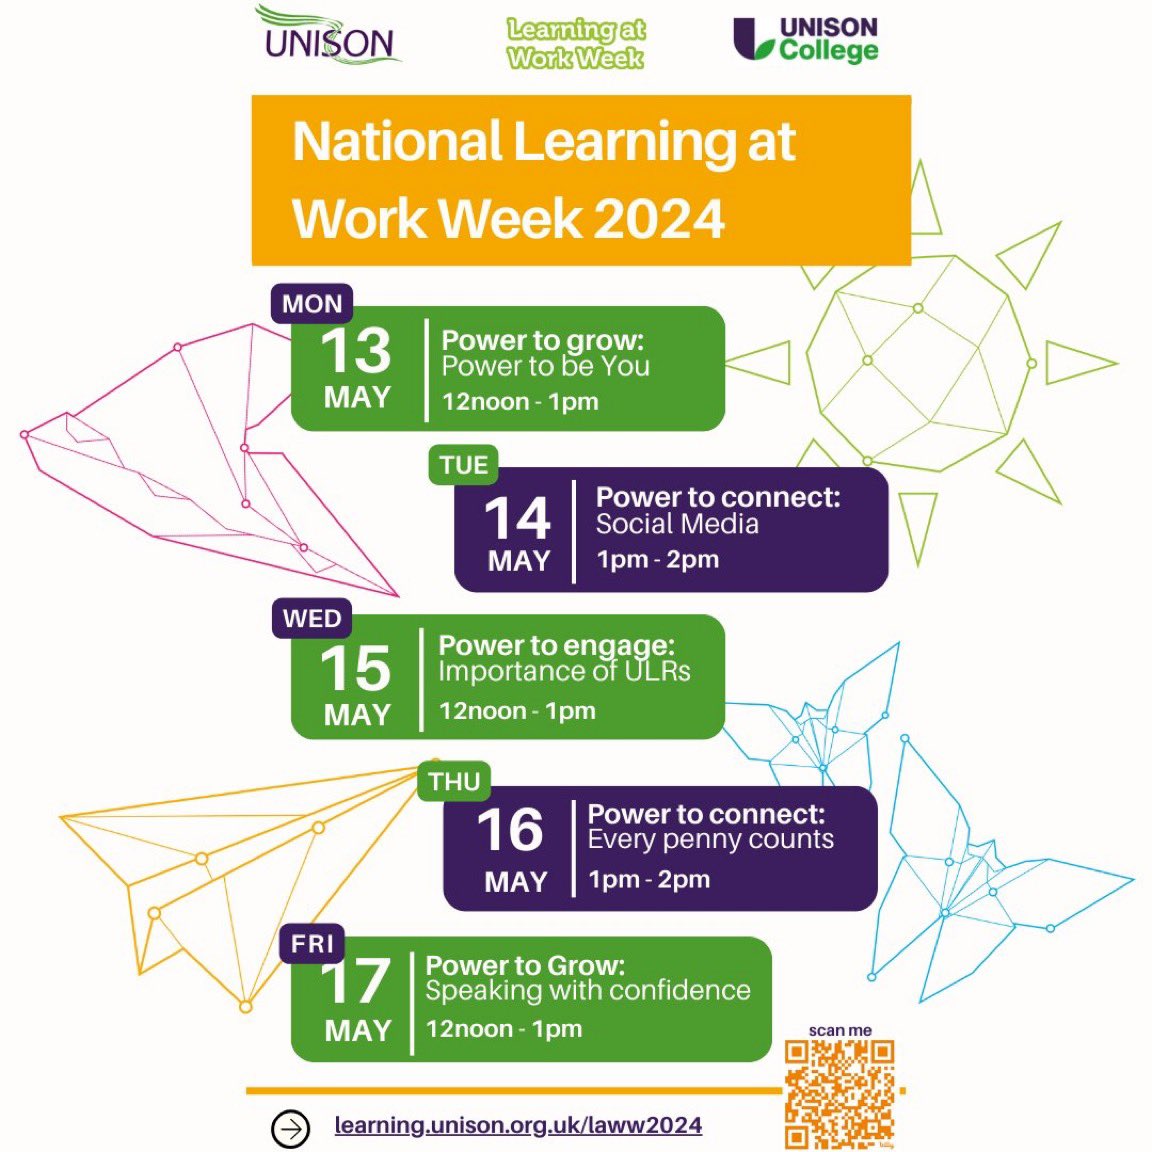 Good morning 💚 Explore the power of @unisonlearning learning during this year’s national Learning at Work Week 13-17 May!

All sessions are free of charge and open to all @unisontheunion members.

For more information and to register: learning.unison.org.uk/laww2024/